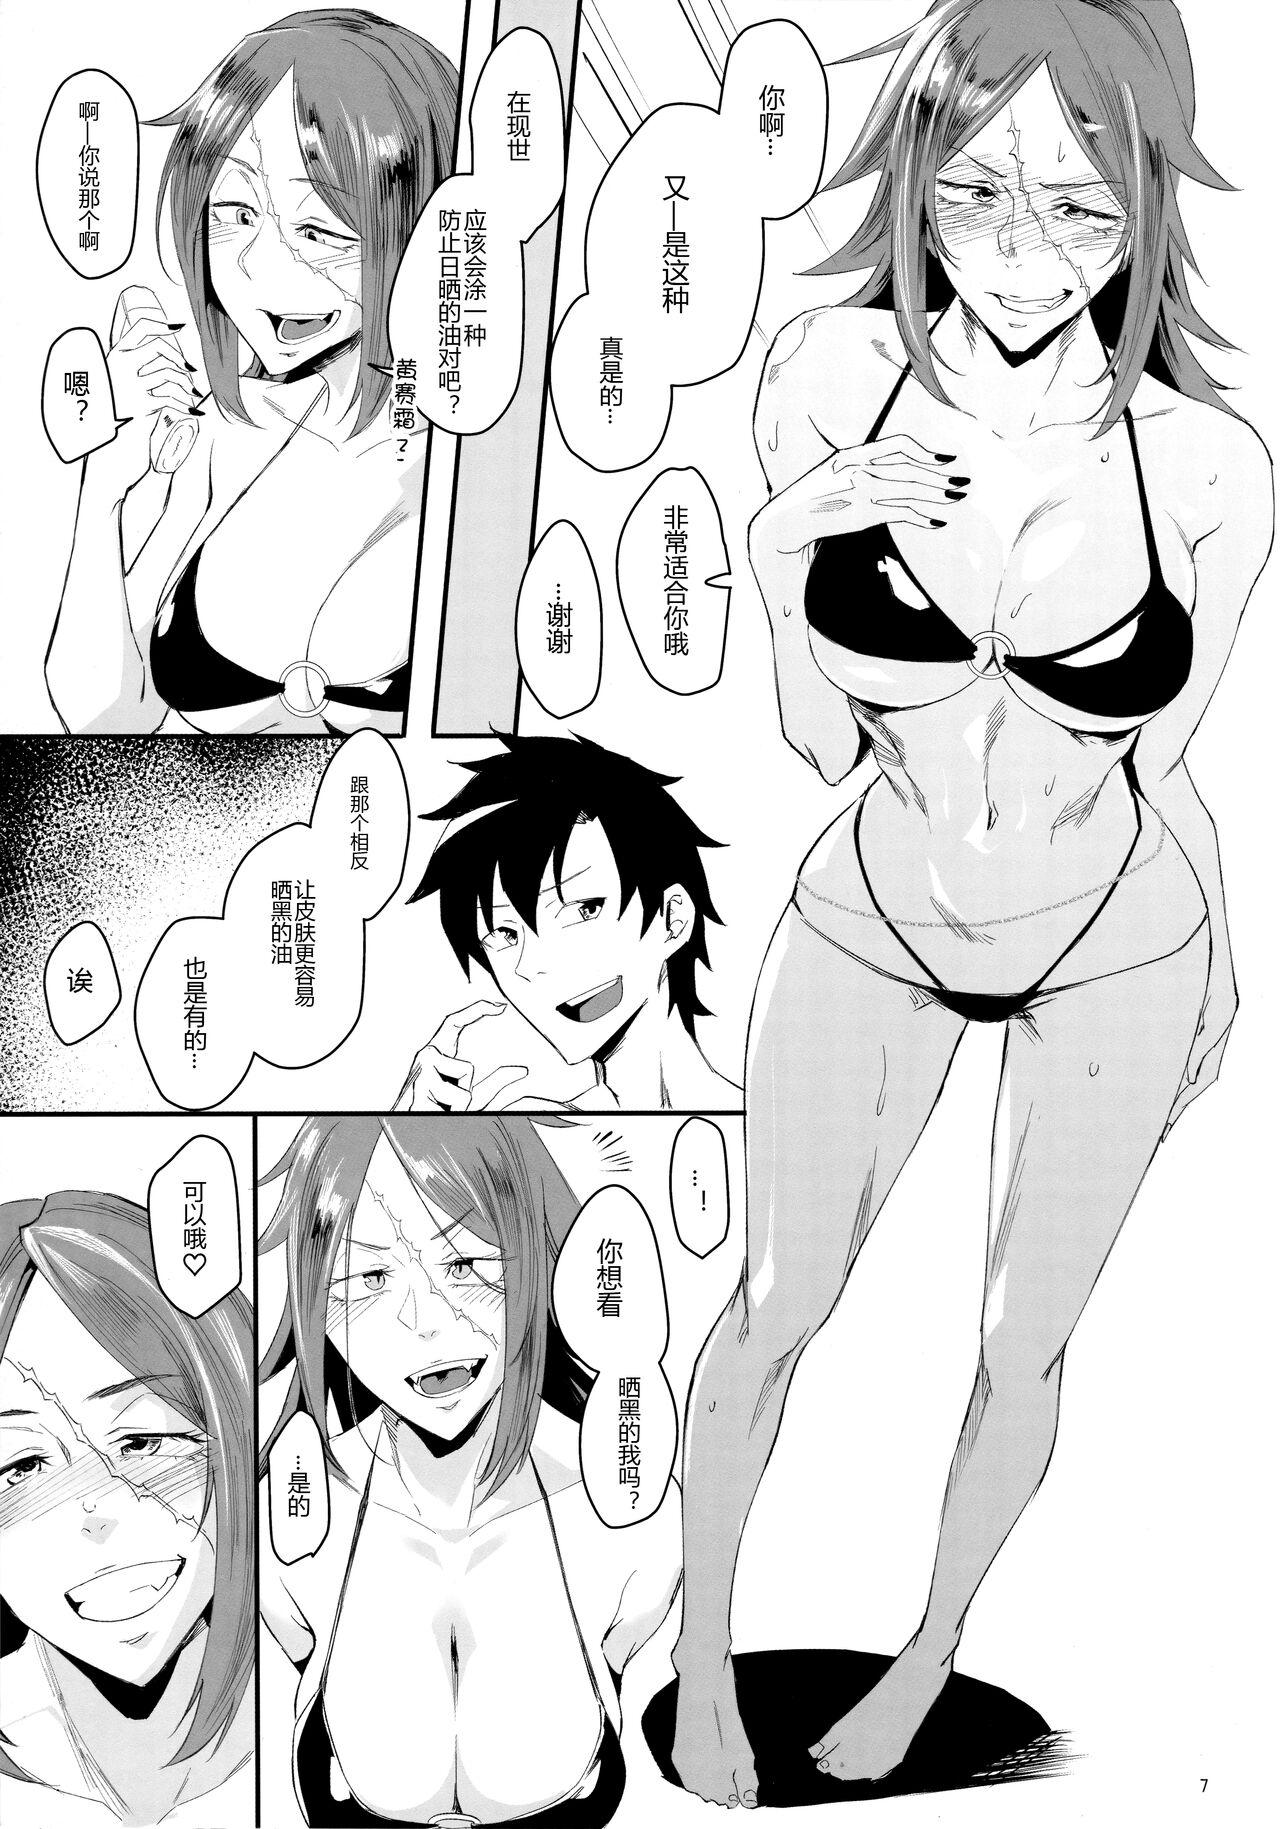 Magrinha Yoi Drake san 7Days in Summer Island - Fate grand order Perverted - Page 7